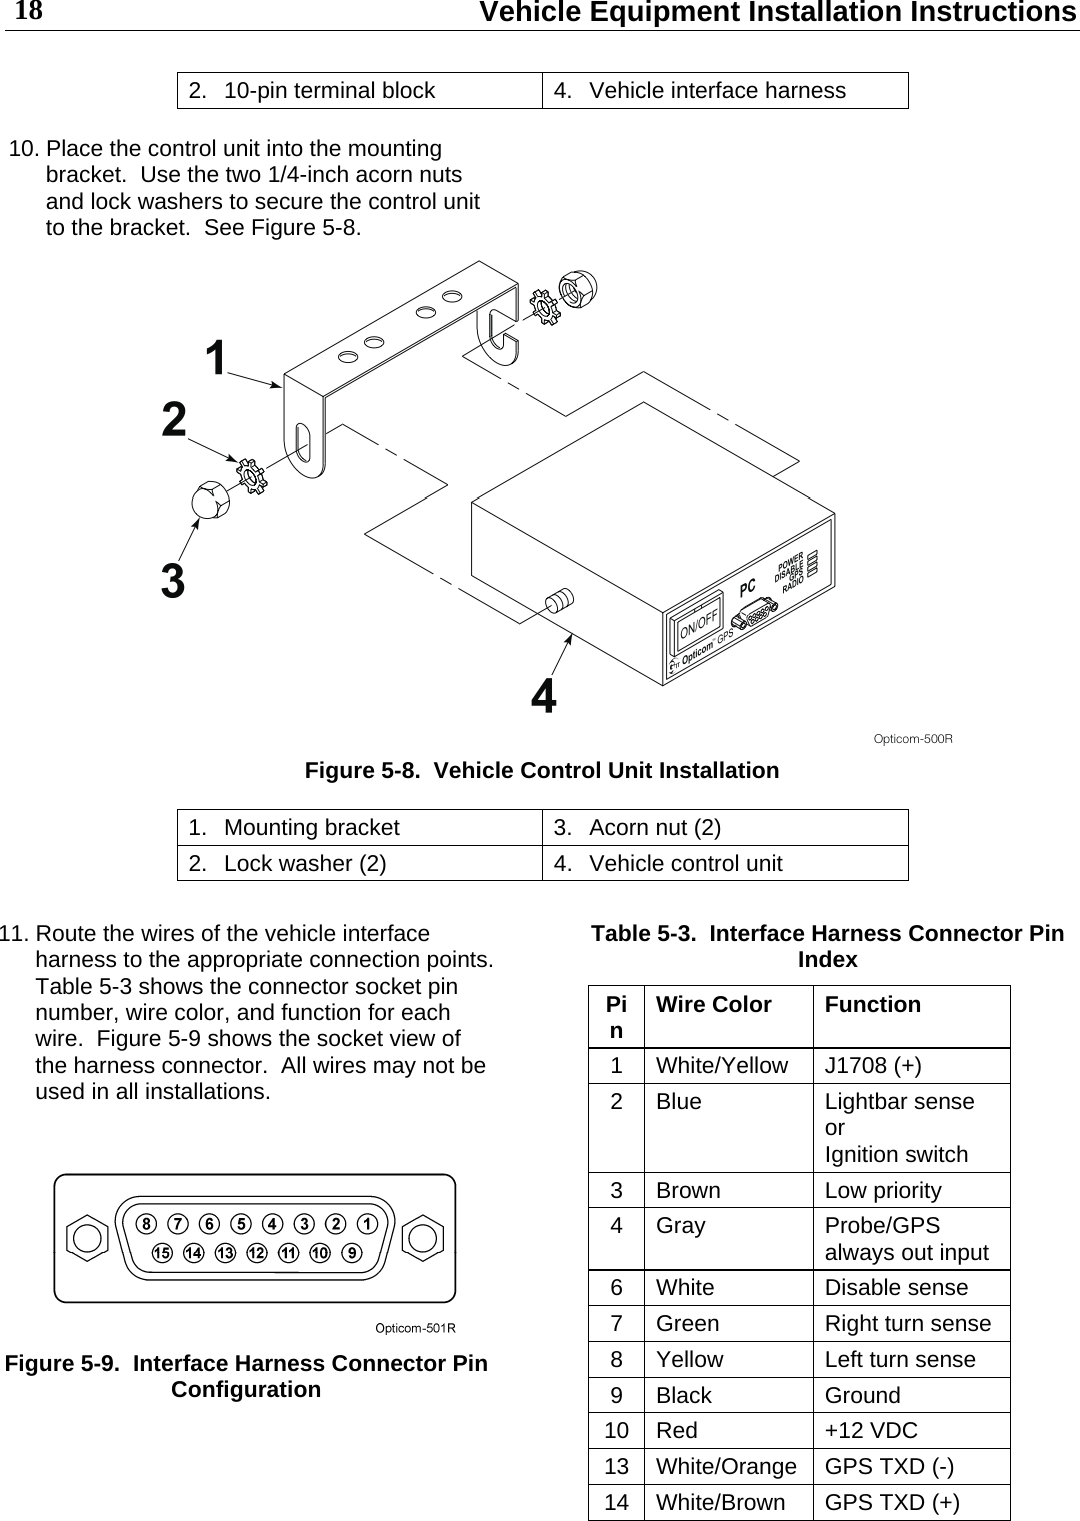  Vehicle Equipment Installation Instructions 18 2.  10-pin terminal block  4.  Vehicle interface harness  10. Place the control unit into the mounting bracket.  Use the two 1/4-inch acorn nuts and lock washers to secure the control unit to the bracket.  See Figure 5-8.    Figure 5-8.  Vehicle Control Unit Installation 1.  Mounting bracket  3.  Acorn nut (2) 2.  Lock washer (2)  4.  Vehicle control unit  11. Route the wires of the vehicle interface harness to the appropriate connection points.  Table 5-3 shows the connector socket pin number, wire color, and function for each wire.  Figure 5-9 shows the socket view of the harness connector.  All wires may not be used in all installations.   Figure 5-9.  Interface Harness Connector Pin Configuration   Table 5-3.  Interface Harness Connector Pin Index Pin  Wire Color  Function 1 White/Yellow J1708 (+) 2 Blue  Lightbar sense or  Ignition switch 3 Brown  Low priority 4 Gray  Probe/GPS always out input 6 White  Disable sense 7  Green  Right turn sense 8  Yellow  Left turn sense 9 Black  Ground 10 Red  +12 VDC 13  White/Orange  GPS TXD (-) 14  White/Brown  GPS TXD (+) 